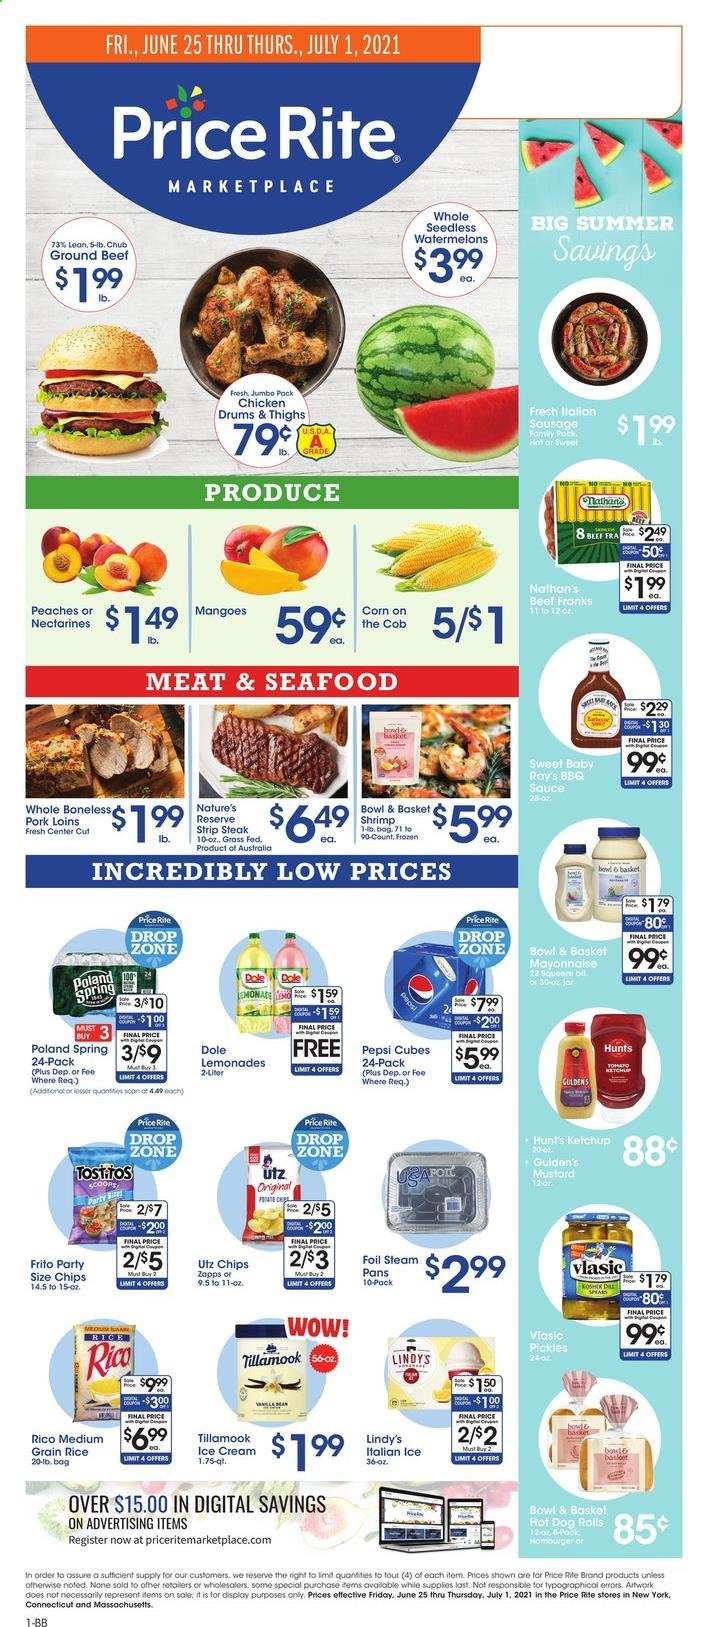 thumbnail - Price Rite Flyer - 06/25/2021 - 07/01/2021 - Sales products - hot dog rolls, Bowl & Basket, corn, Dole, mango, seafood, shrimps, sauce, ice cream, Tostitos, pickles, rice, medium grain rice, mustard, ketchup, Pepsi, beef meat, ground beef, steak, striploin steak, foil steam pan, nectarines, peaches. Page 1.